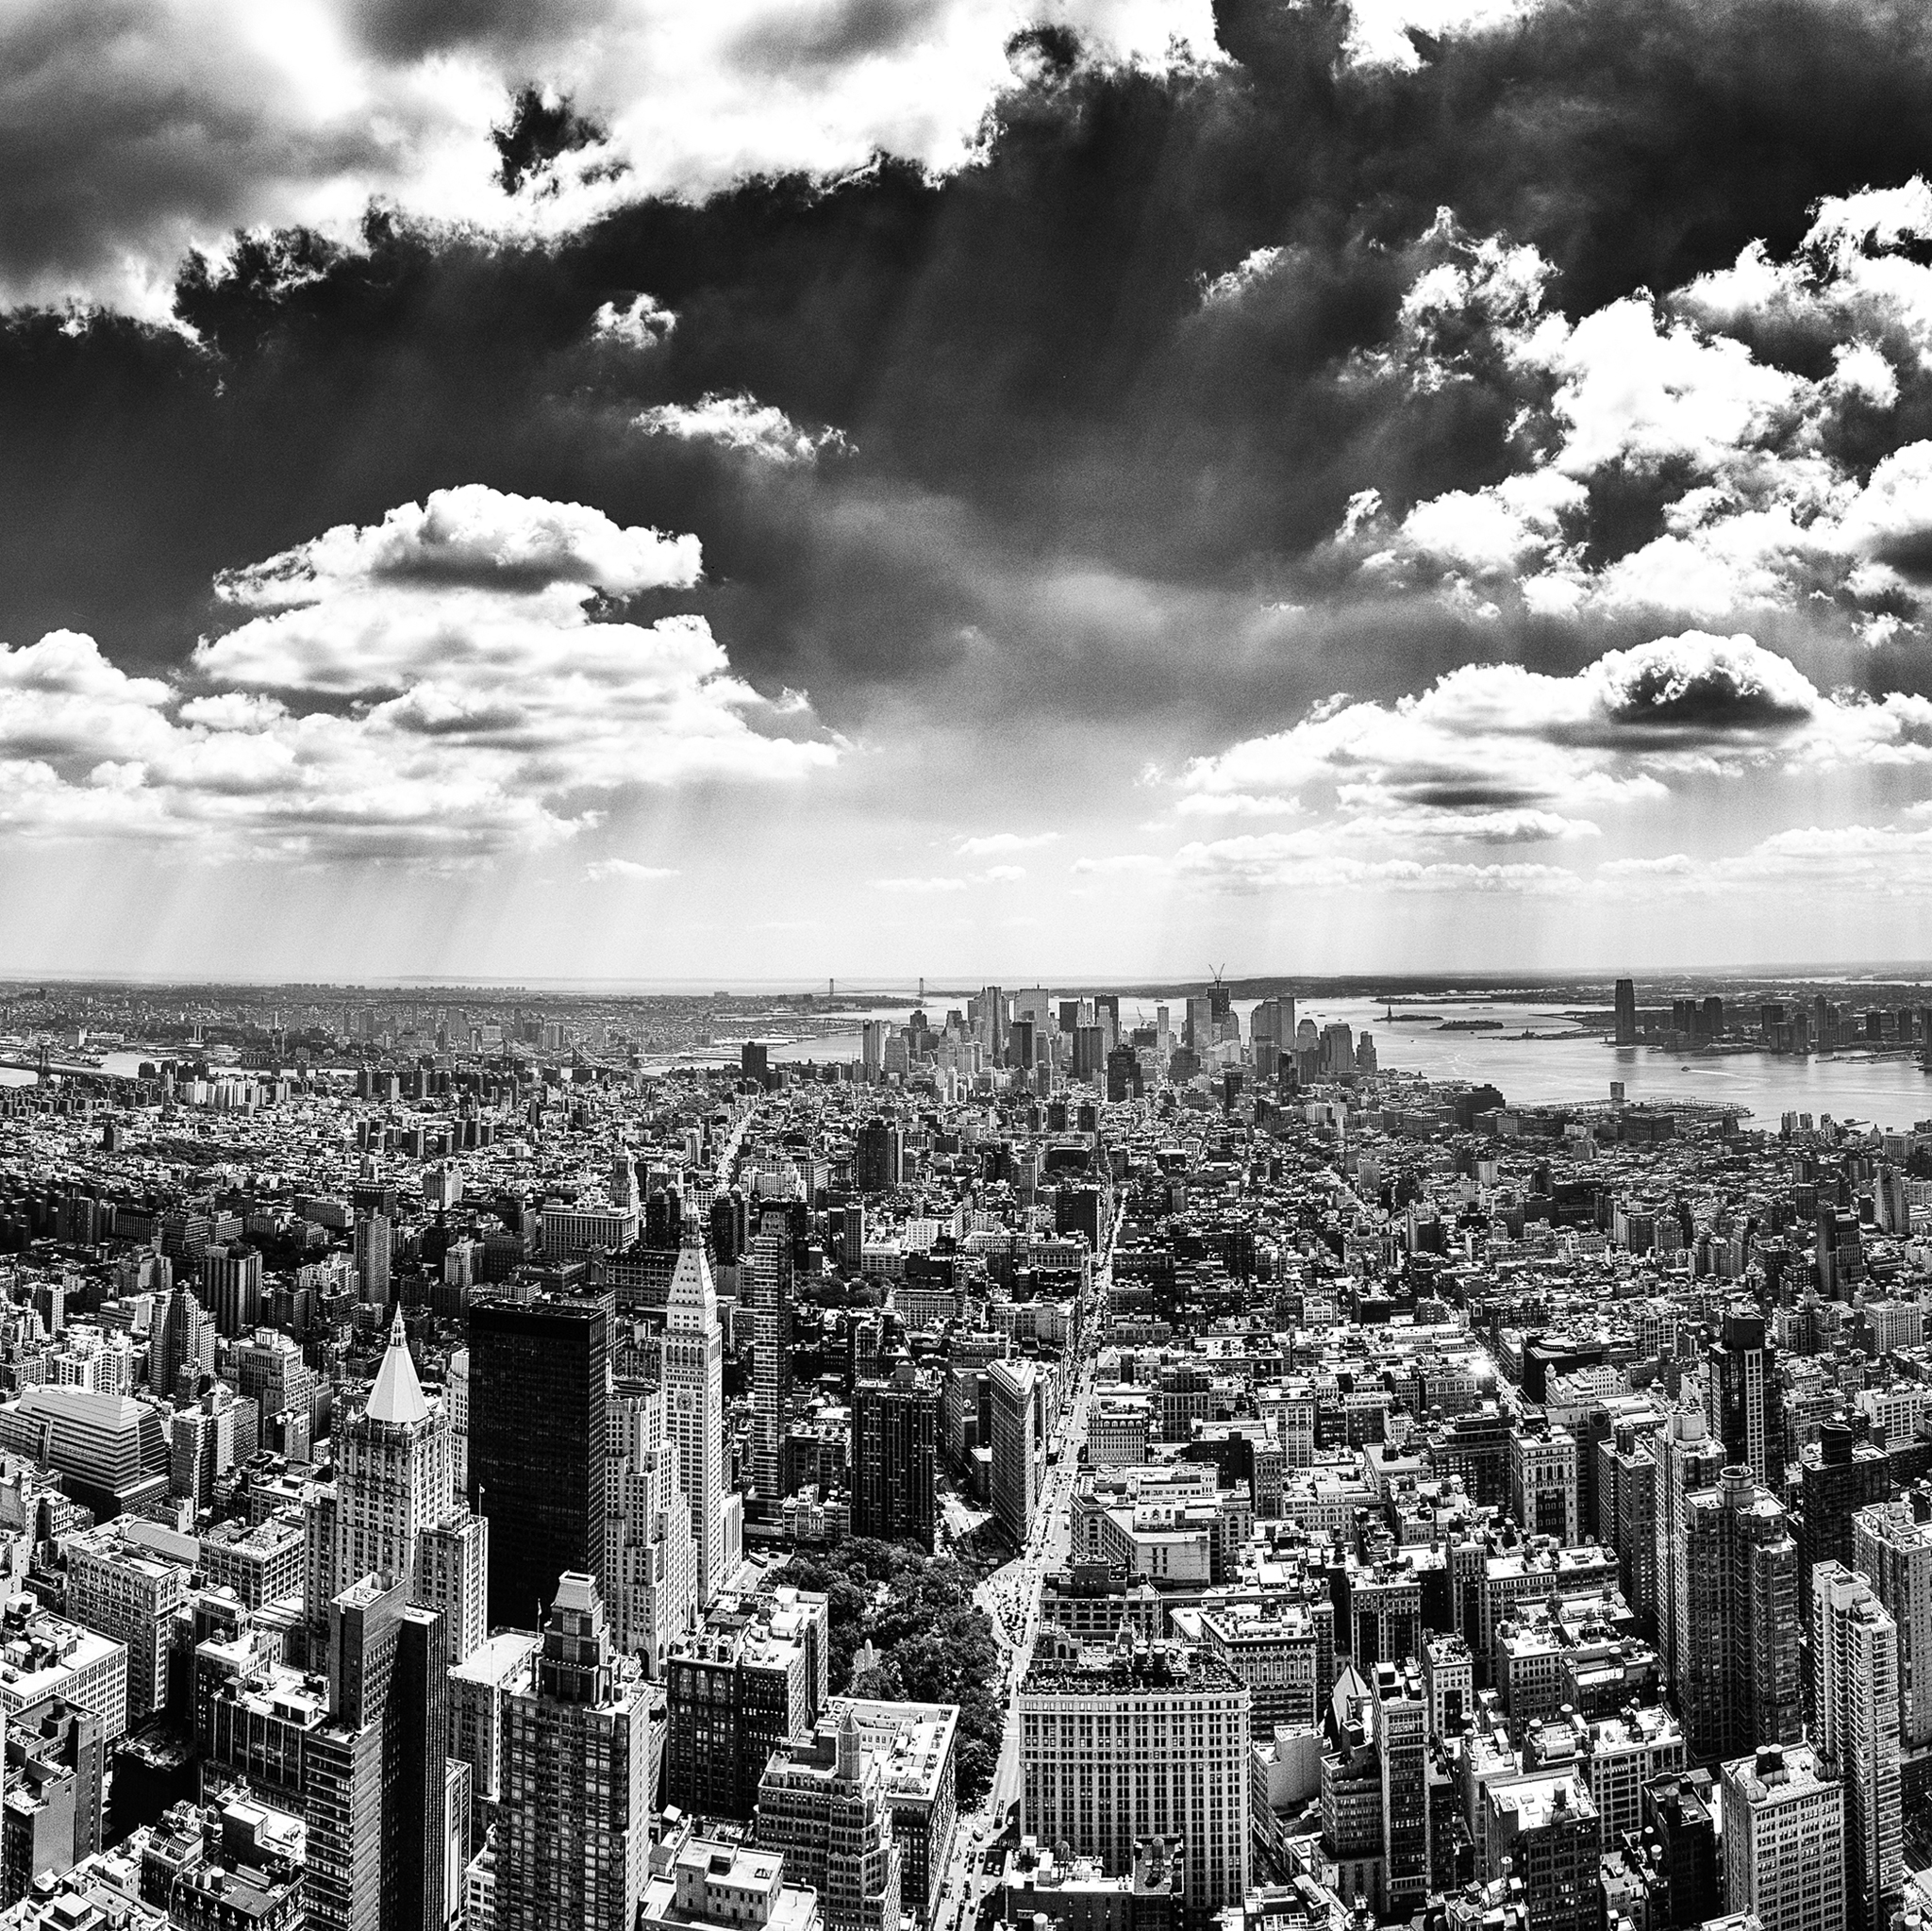 Wallpaper Weekends: New York, New York! for the iPad